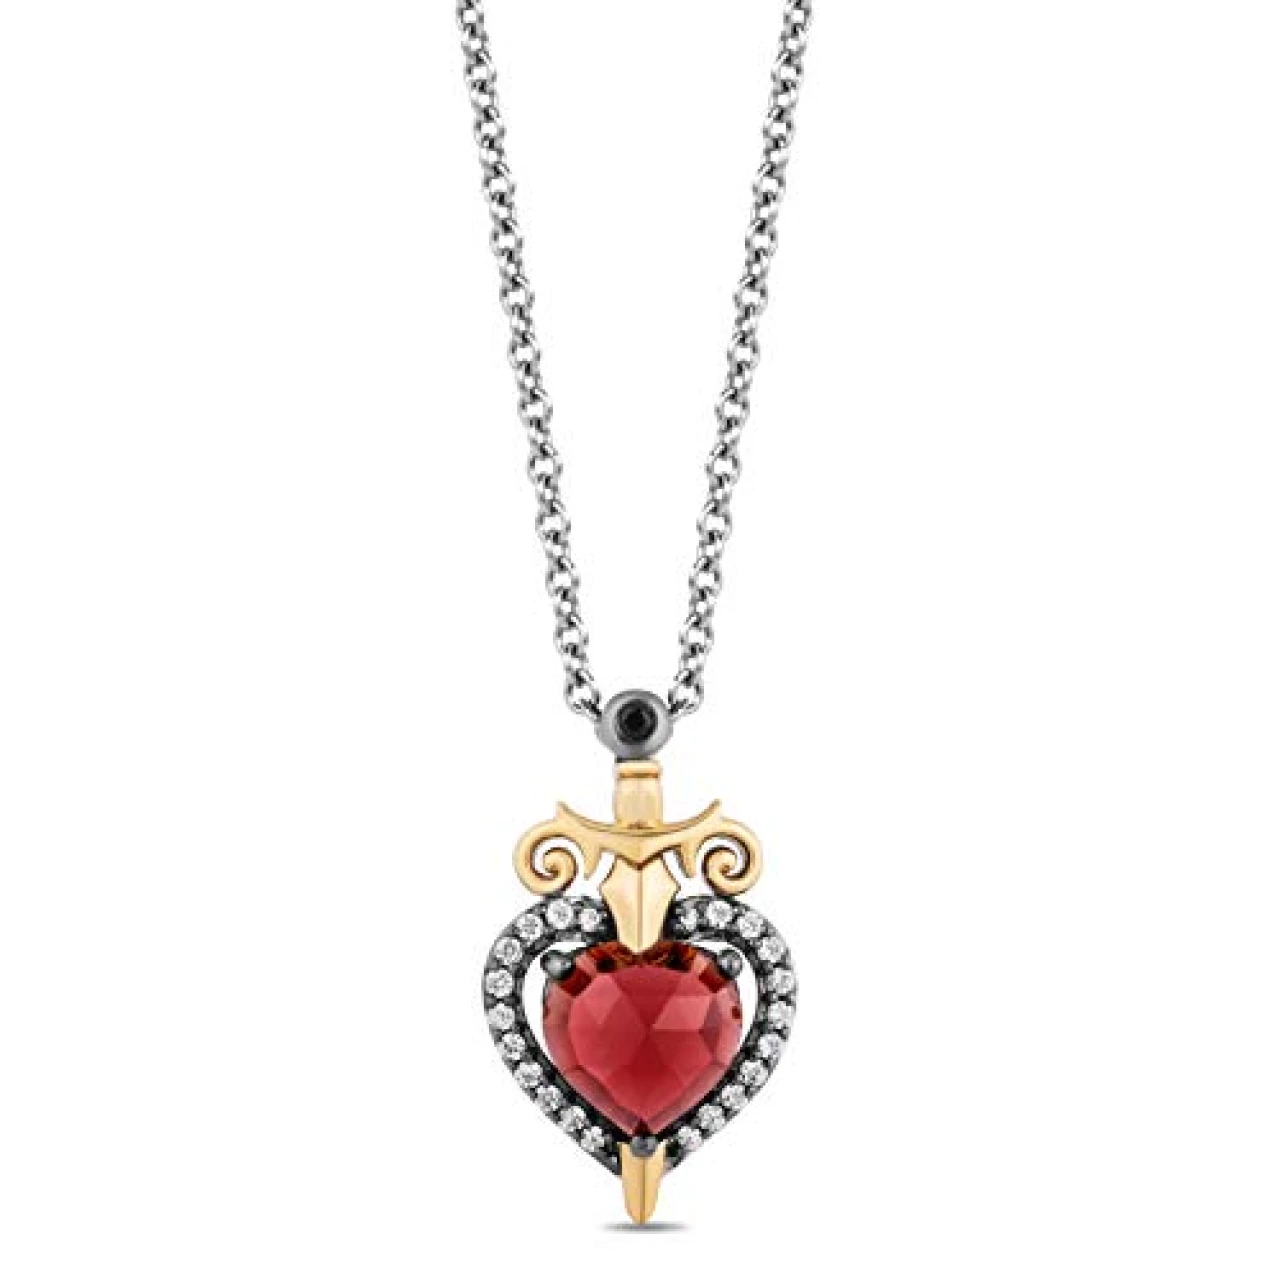 Jewelili Enchanted Disney Fine Jewelry 10K Yellow Gold and Sterling Silver Evil Queen Pendant with 1/10 CTTW Diamonds and Red Garnet